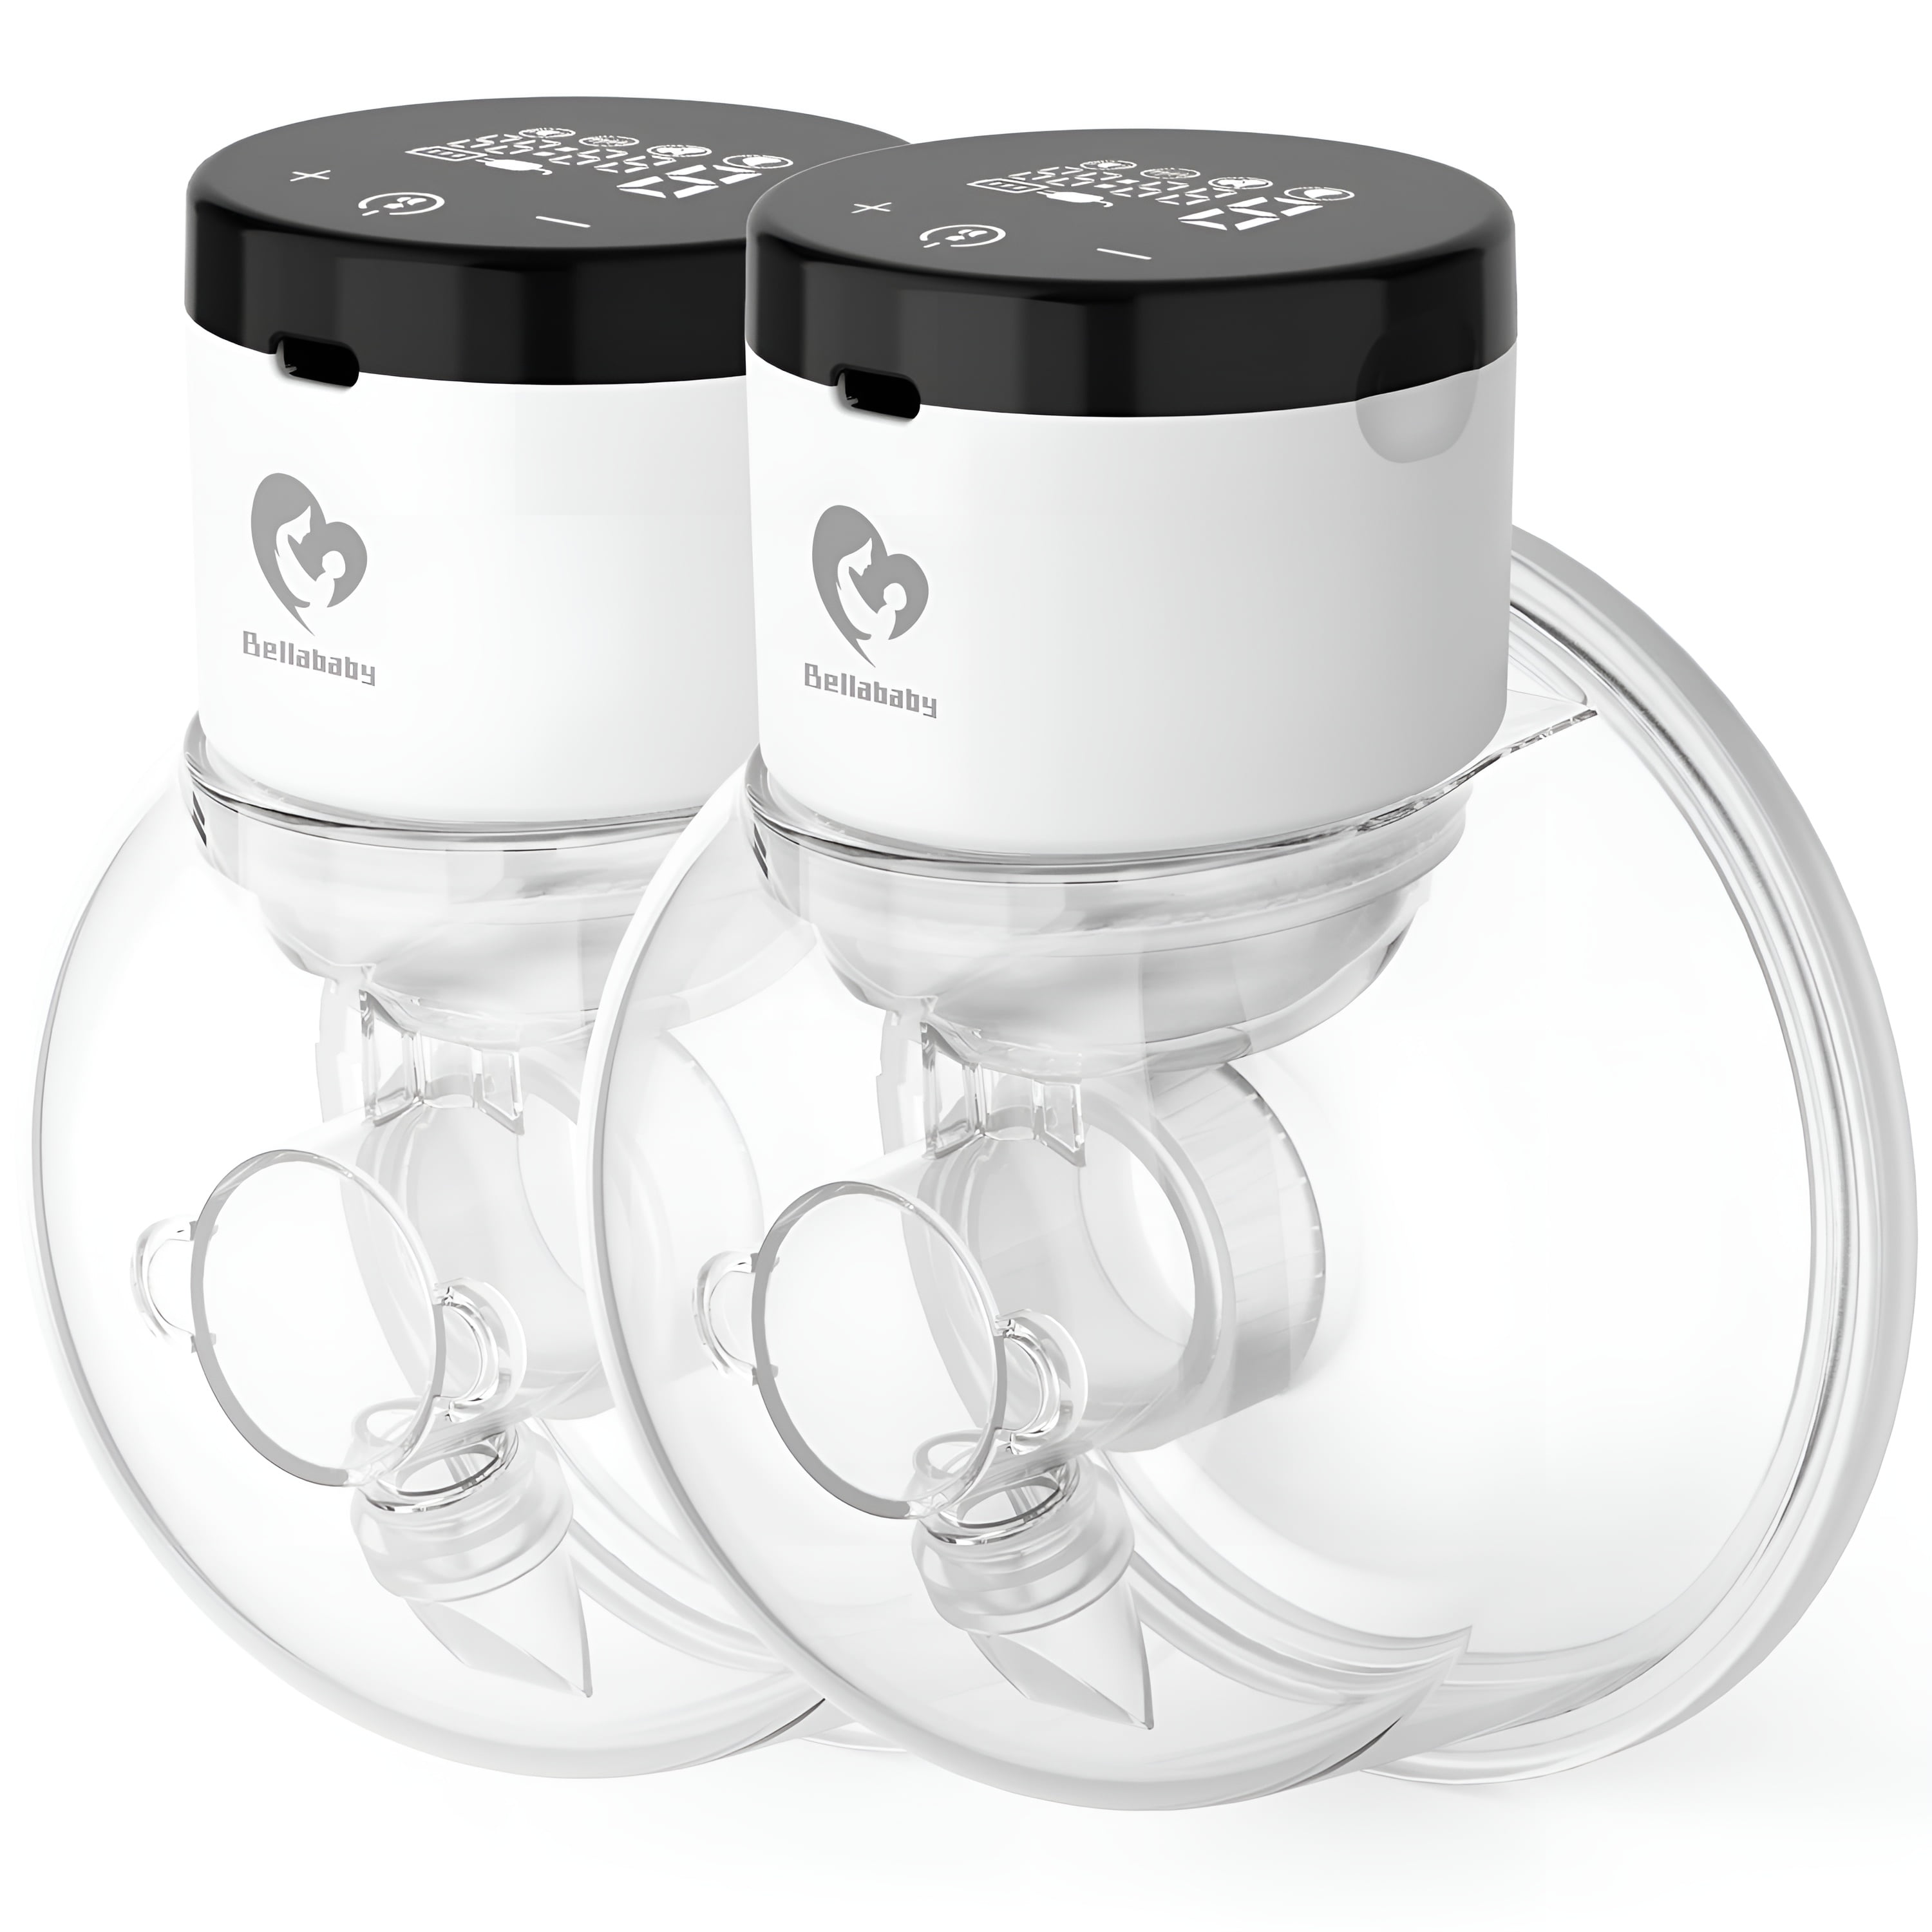 Bellababy Pocket Double Electric Breast Pump Come with Hanging Lanyard  Storage Bags and Adpaters Bottle Thread Changers